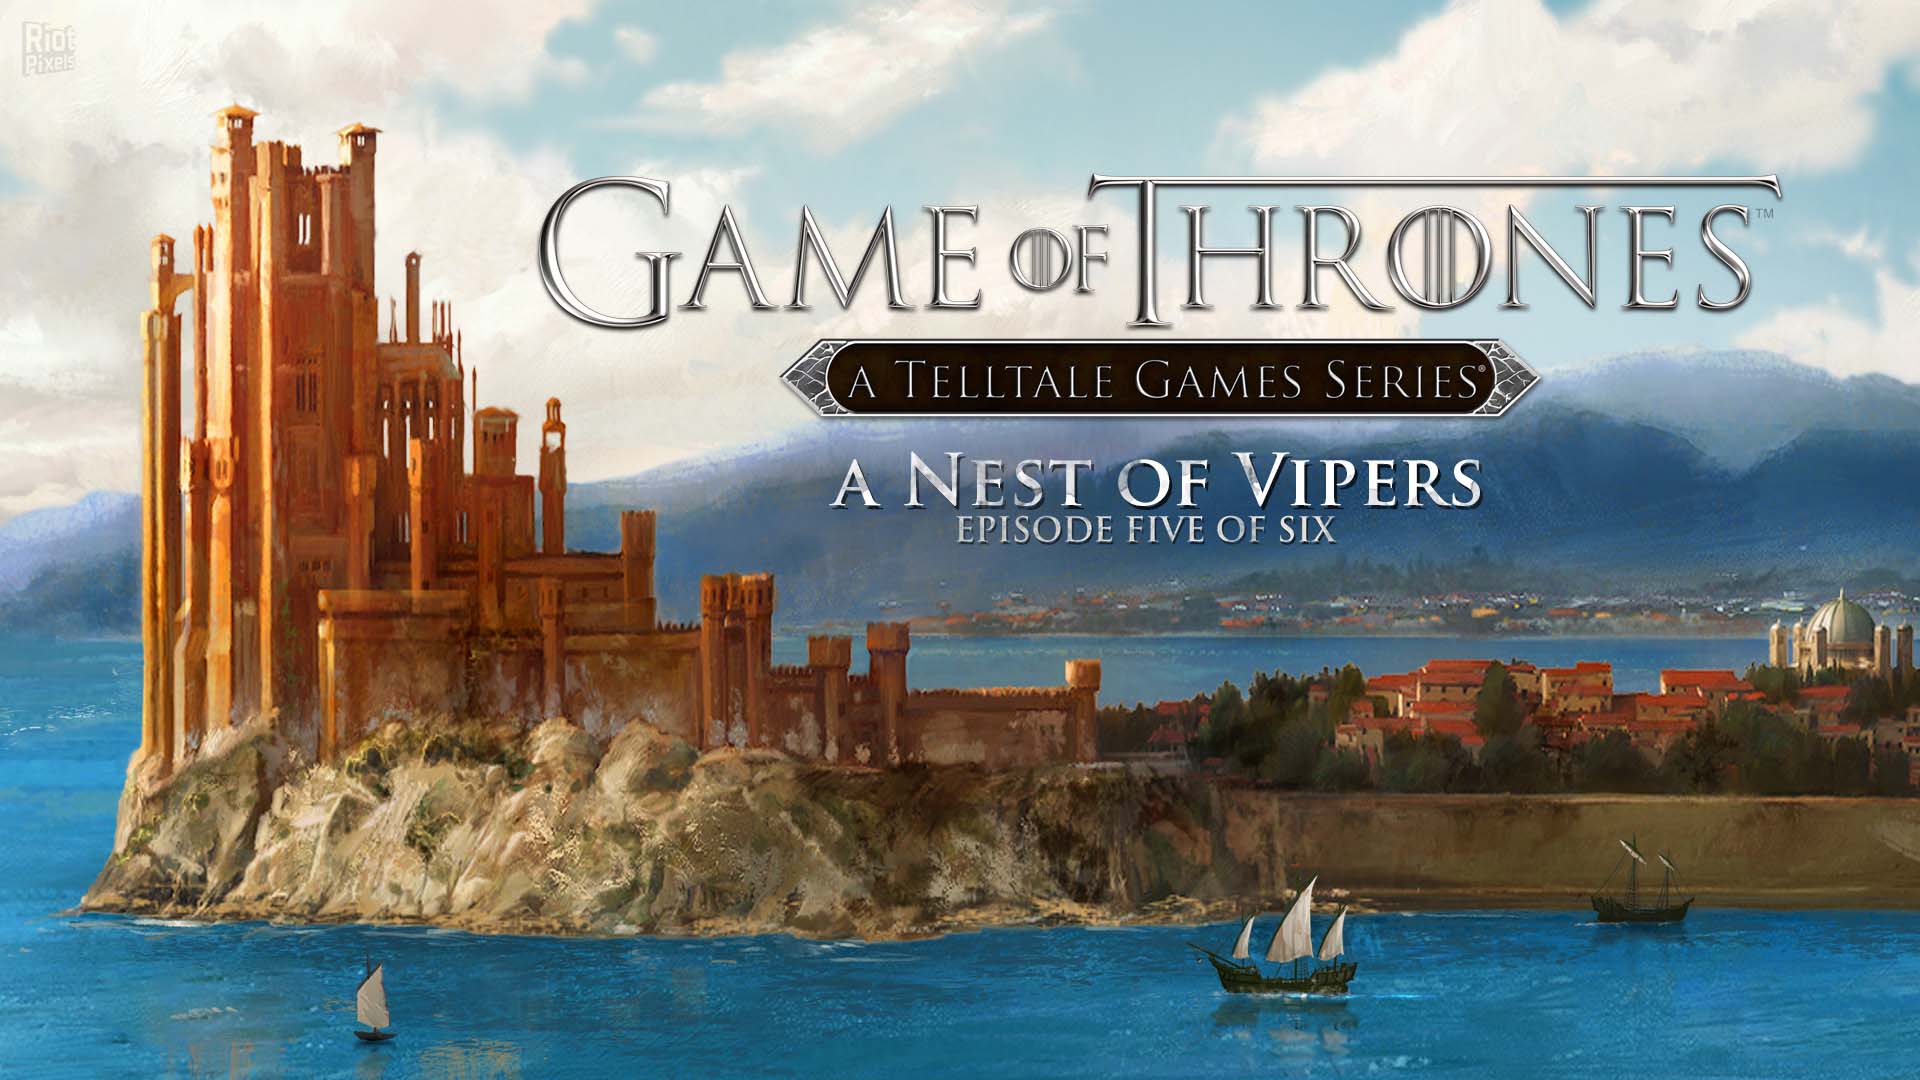 Game of Thrones: A Telltale Games Series Episodes 1-6